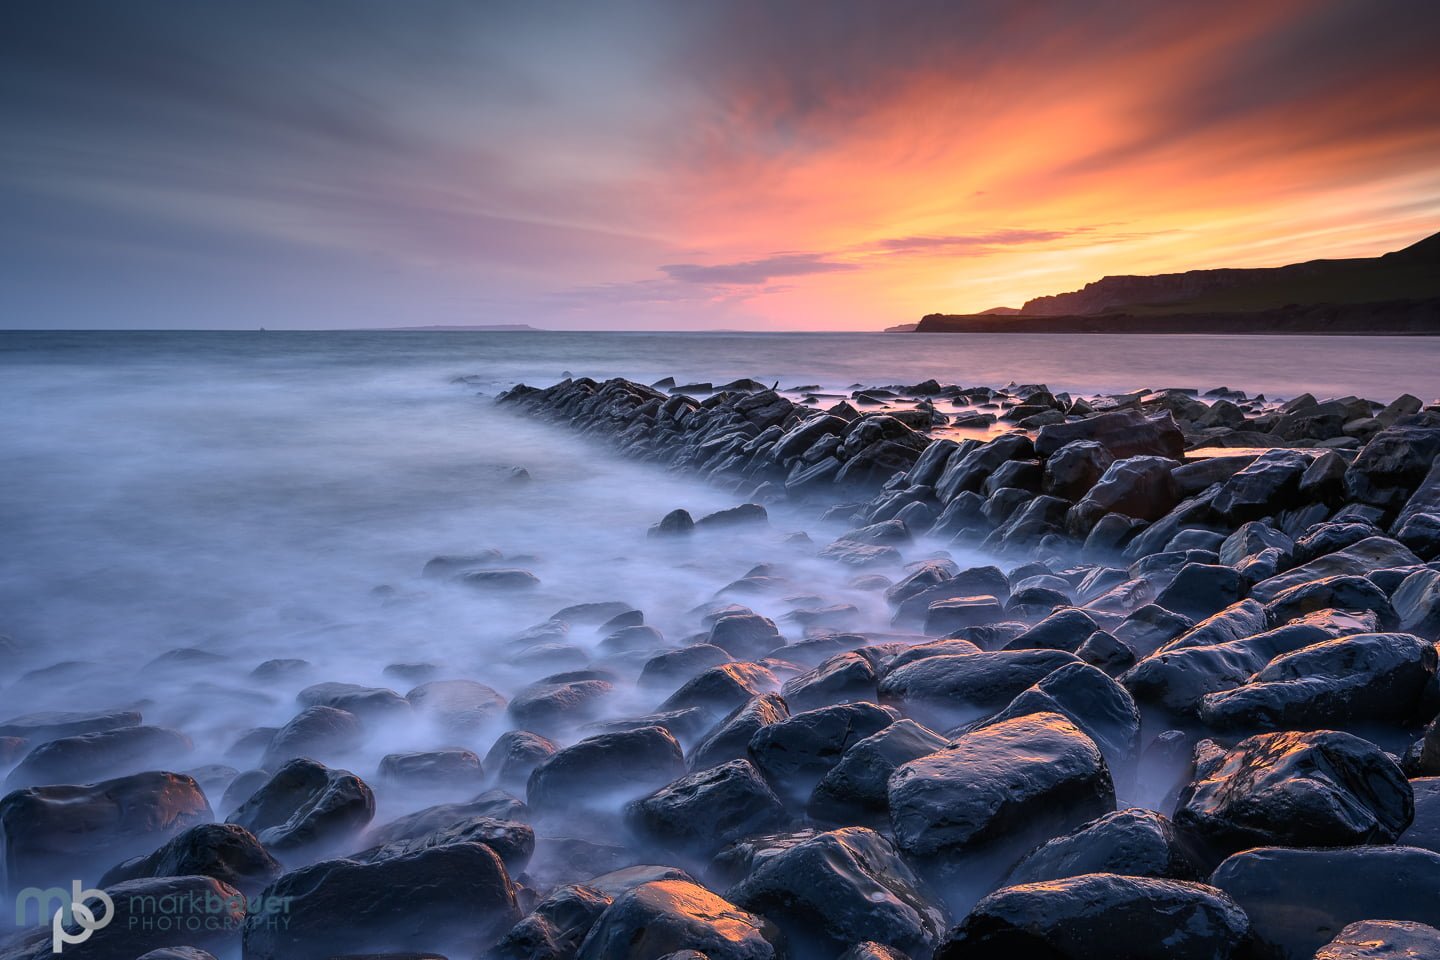 Mark Bauer Photography | Afterglow, Kimmeridge Bay